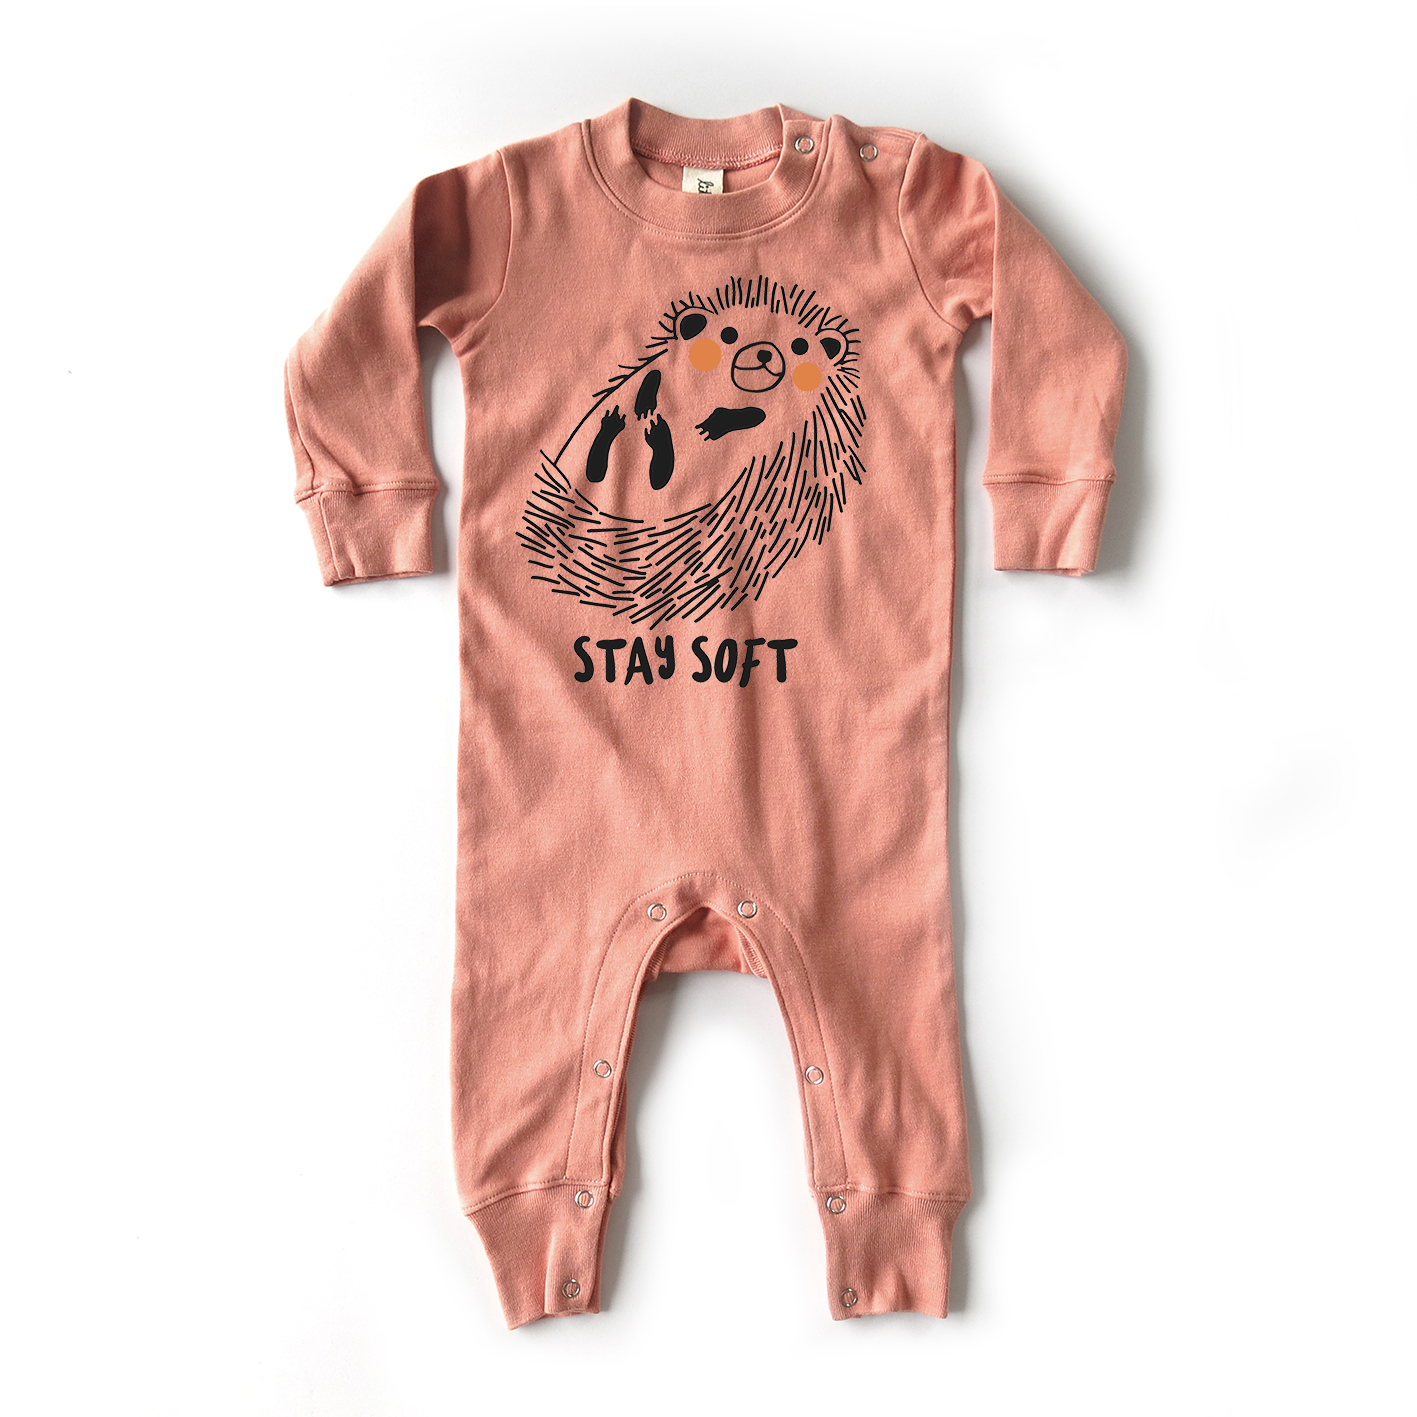 BABY 0-18M [C] LP0224 STAY SOFT PLAYSUIT